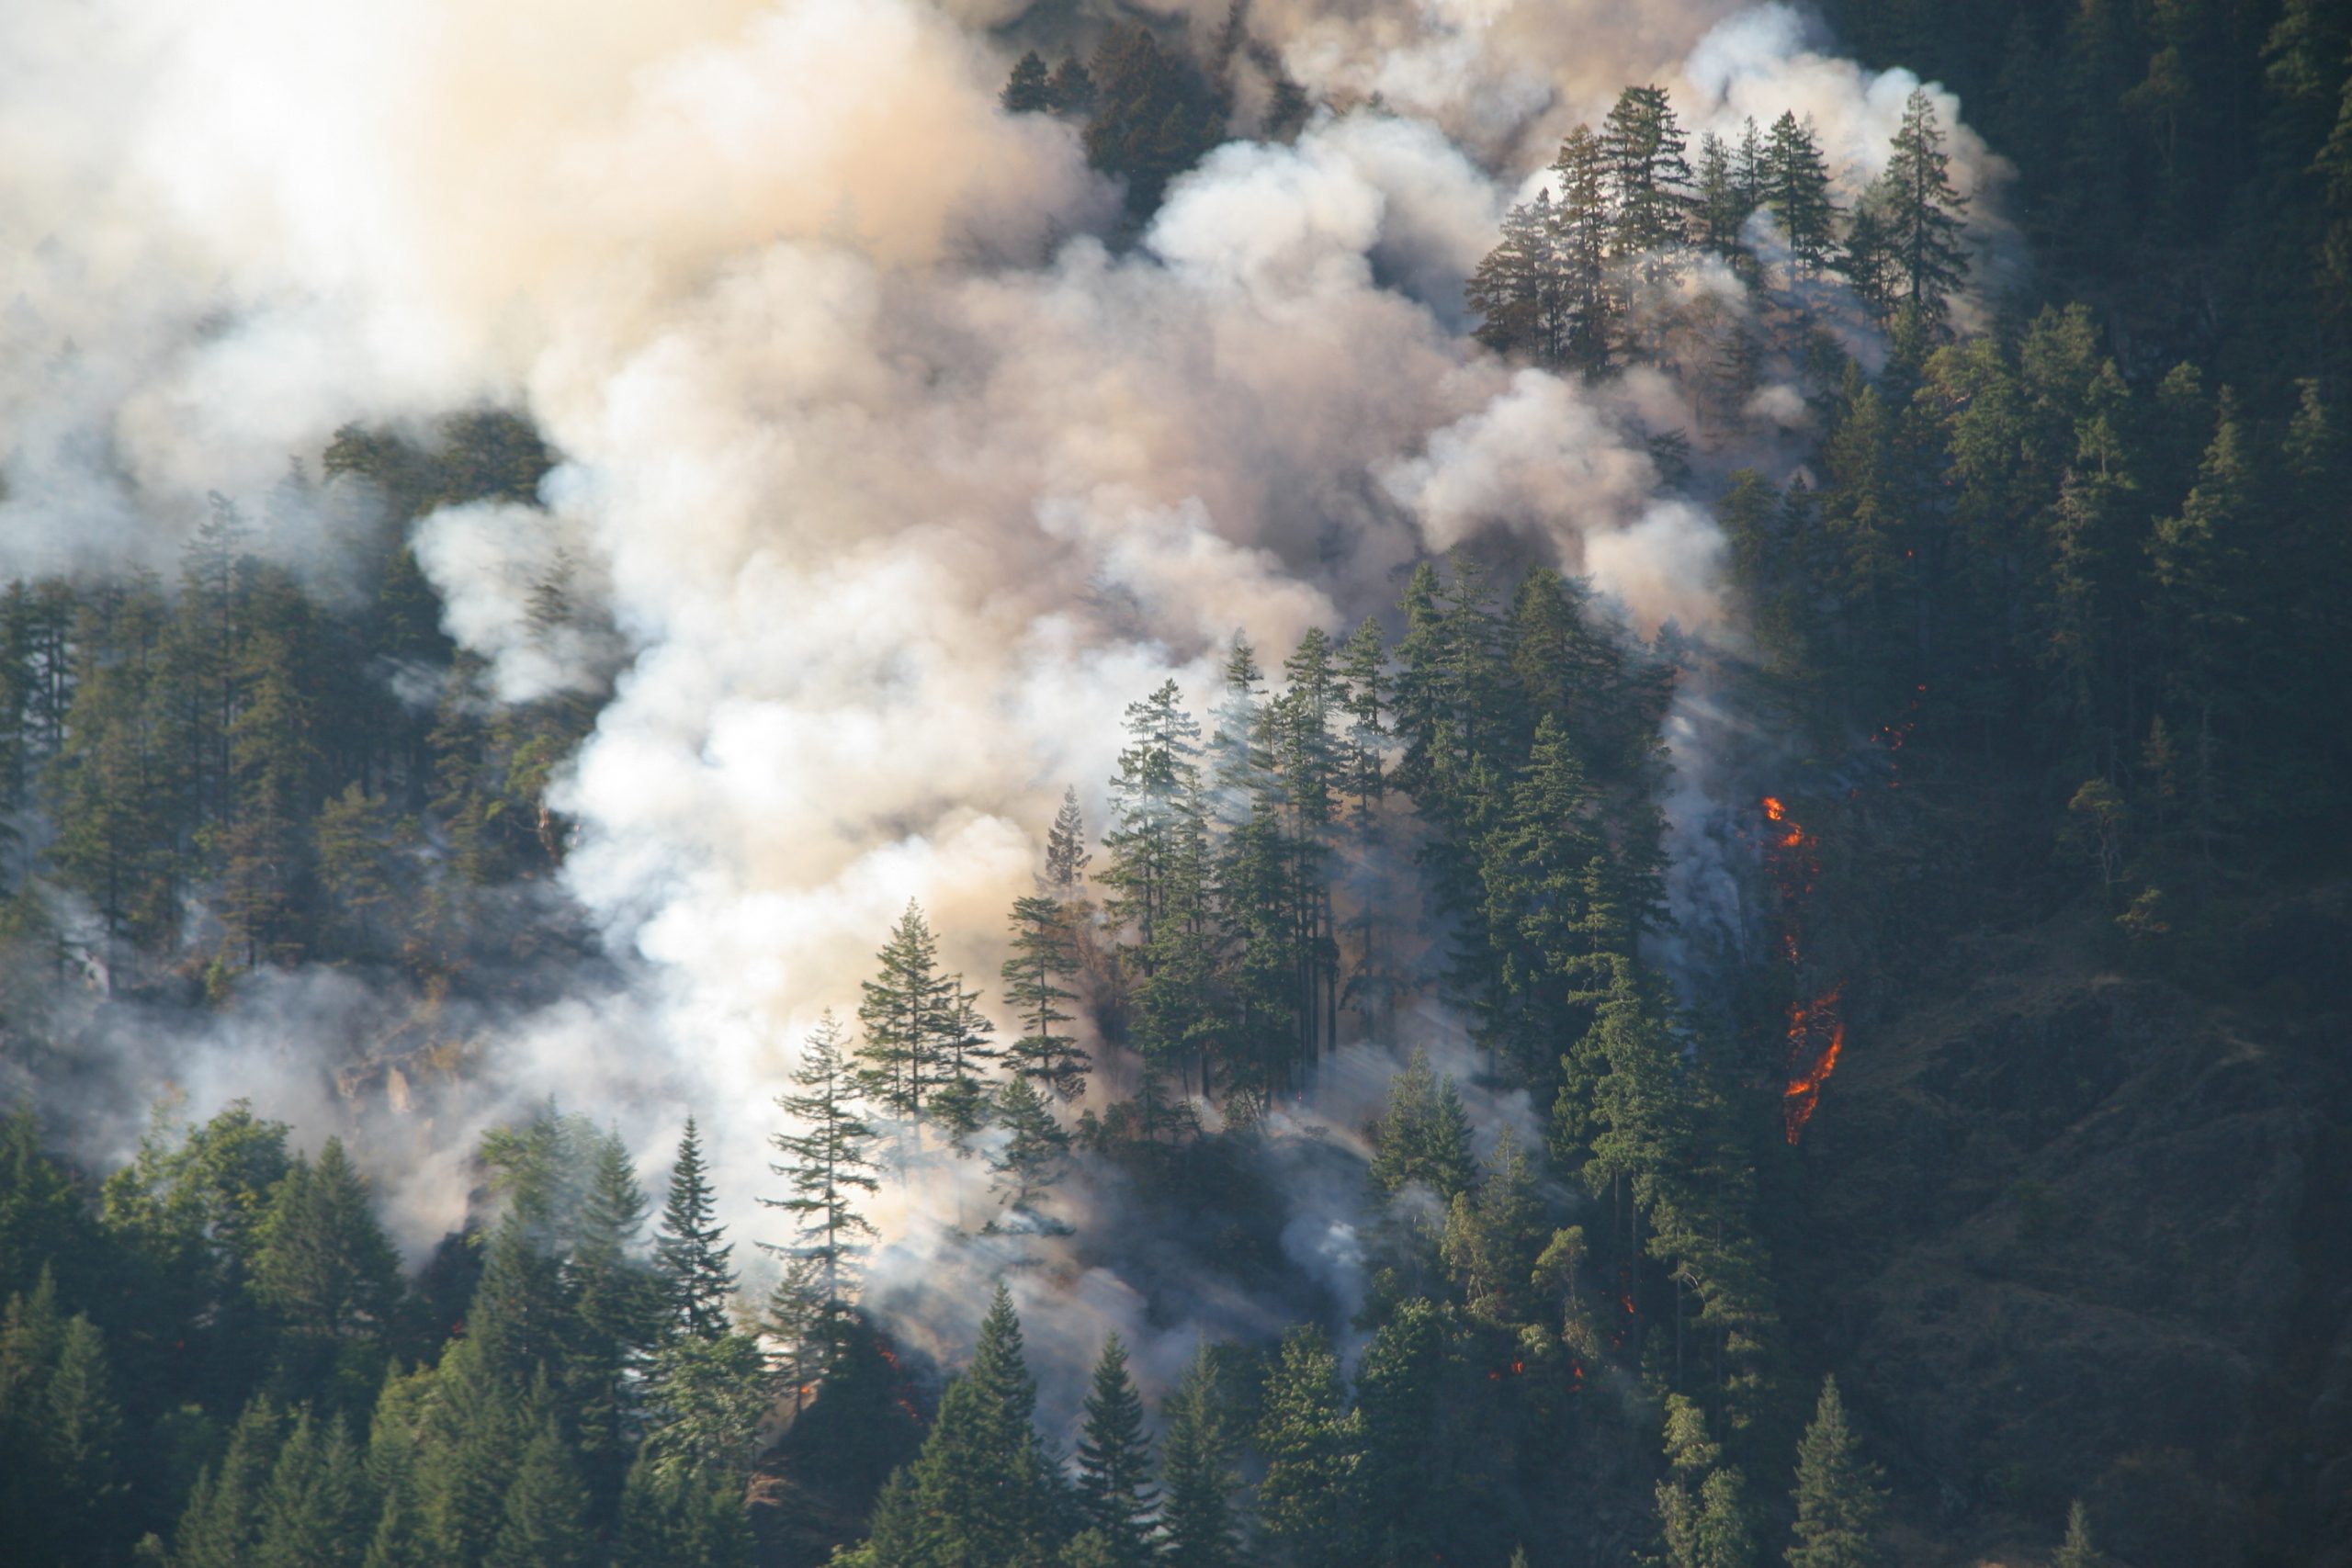 Slater Fire lawsuit expands in Siskiyou County